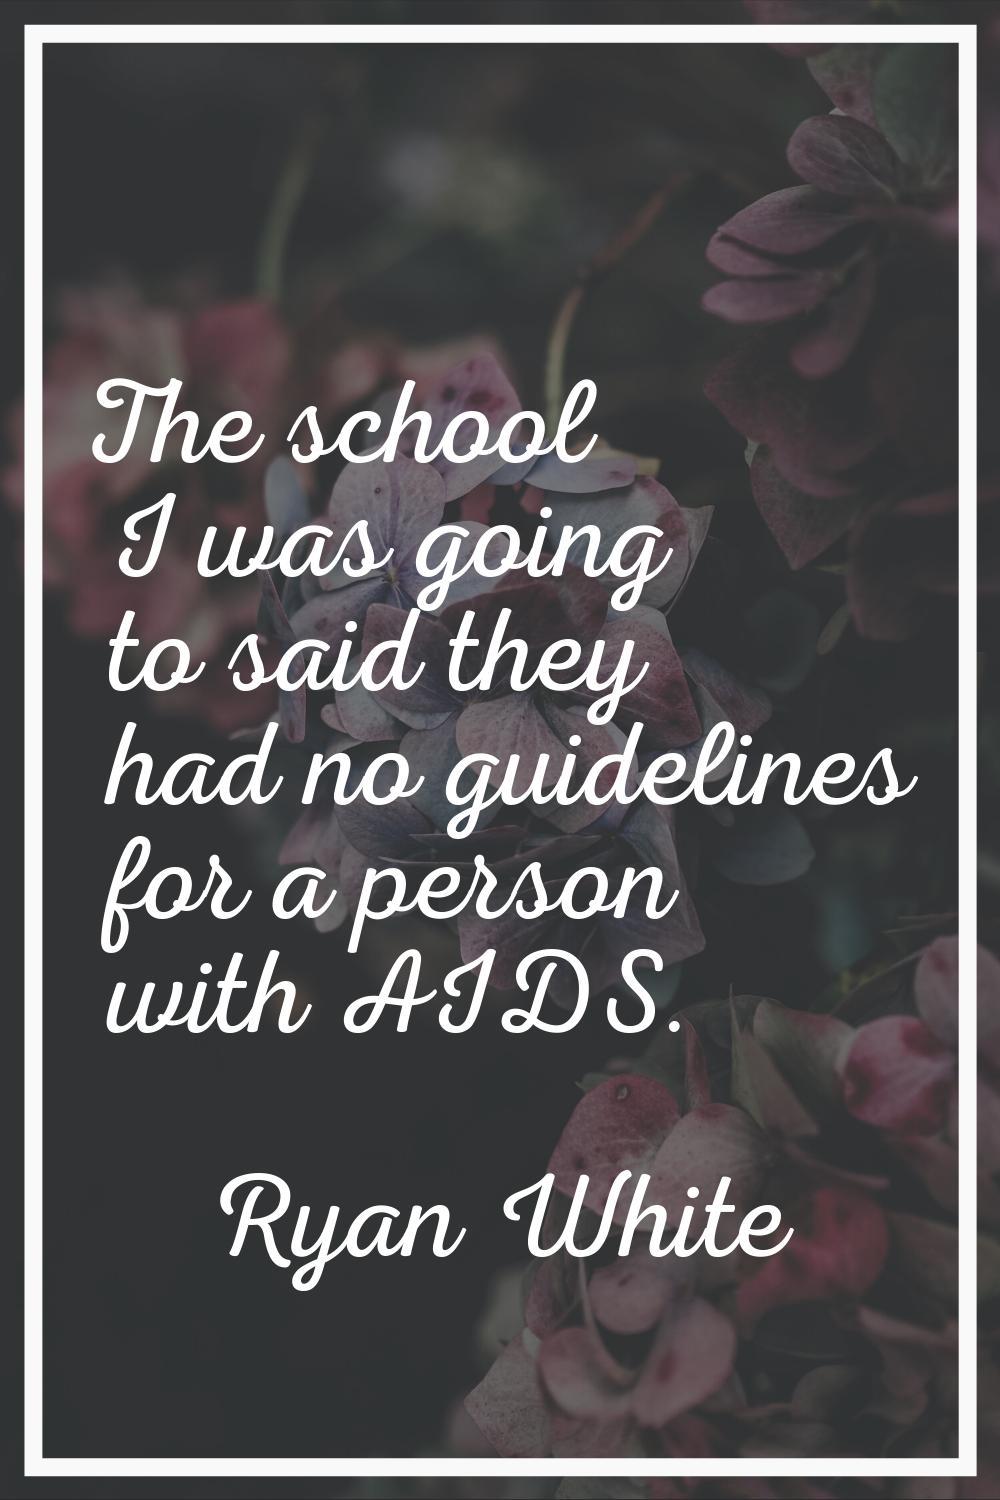 The school I was going to said they had no guidelines for a person with AIDS.